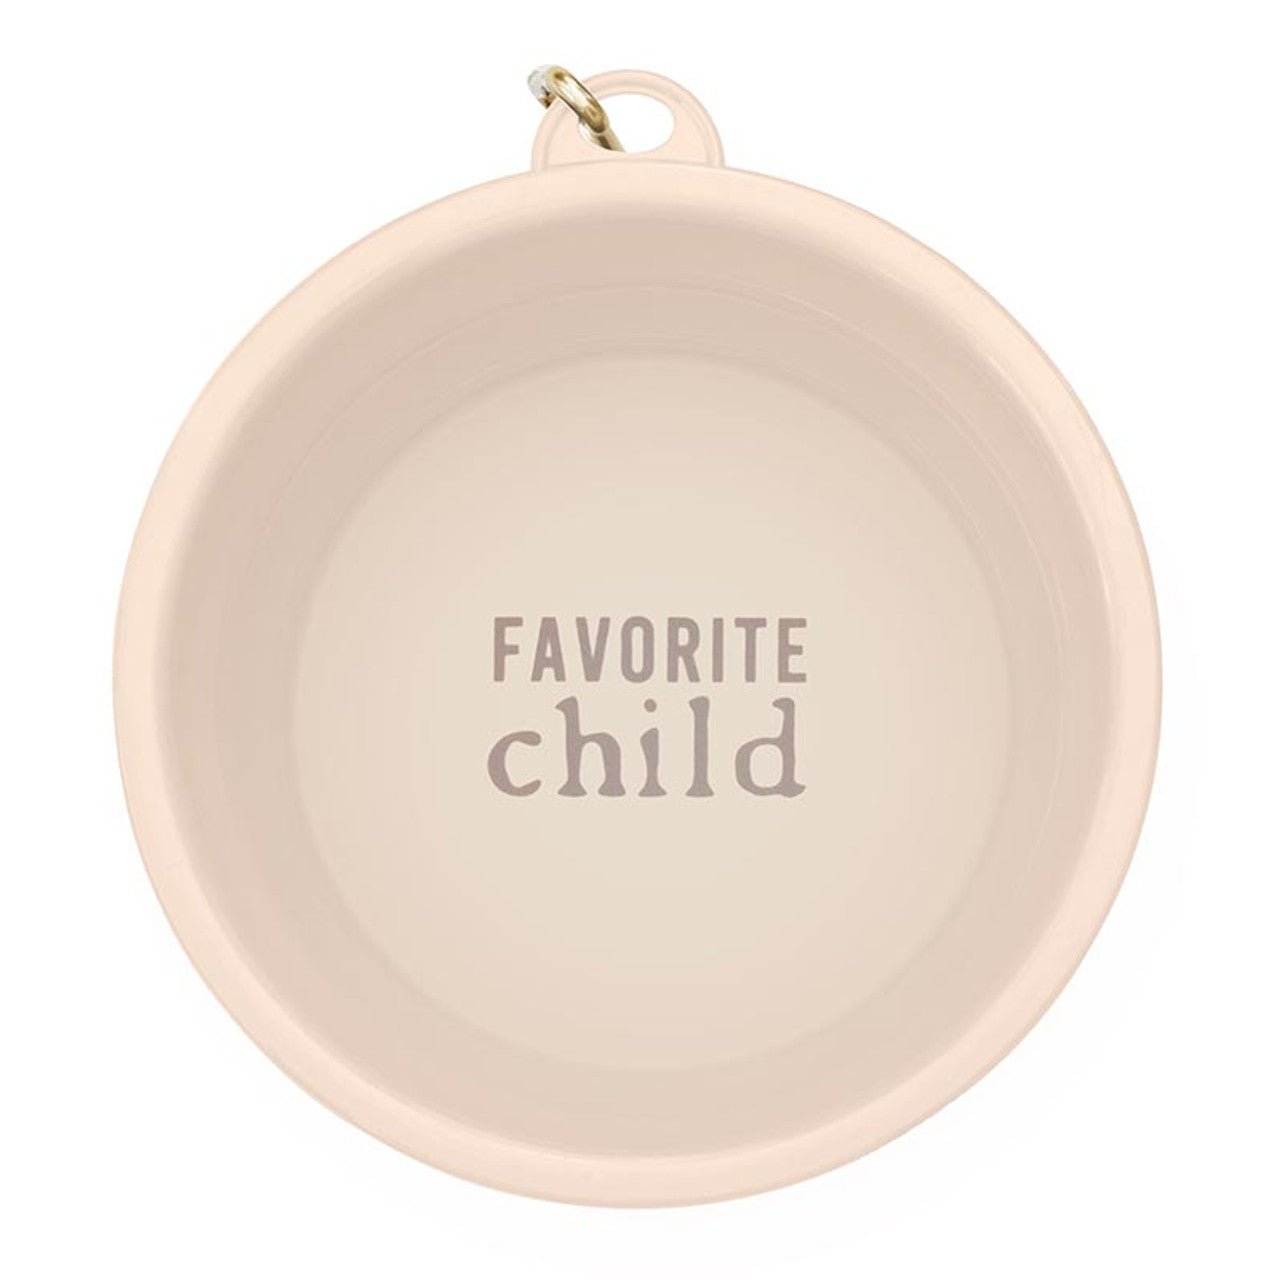 Favorite Child Large Collapsible Pet Bowl | Portable Silicone Bowl